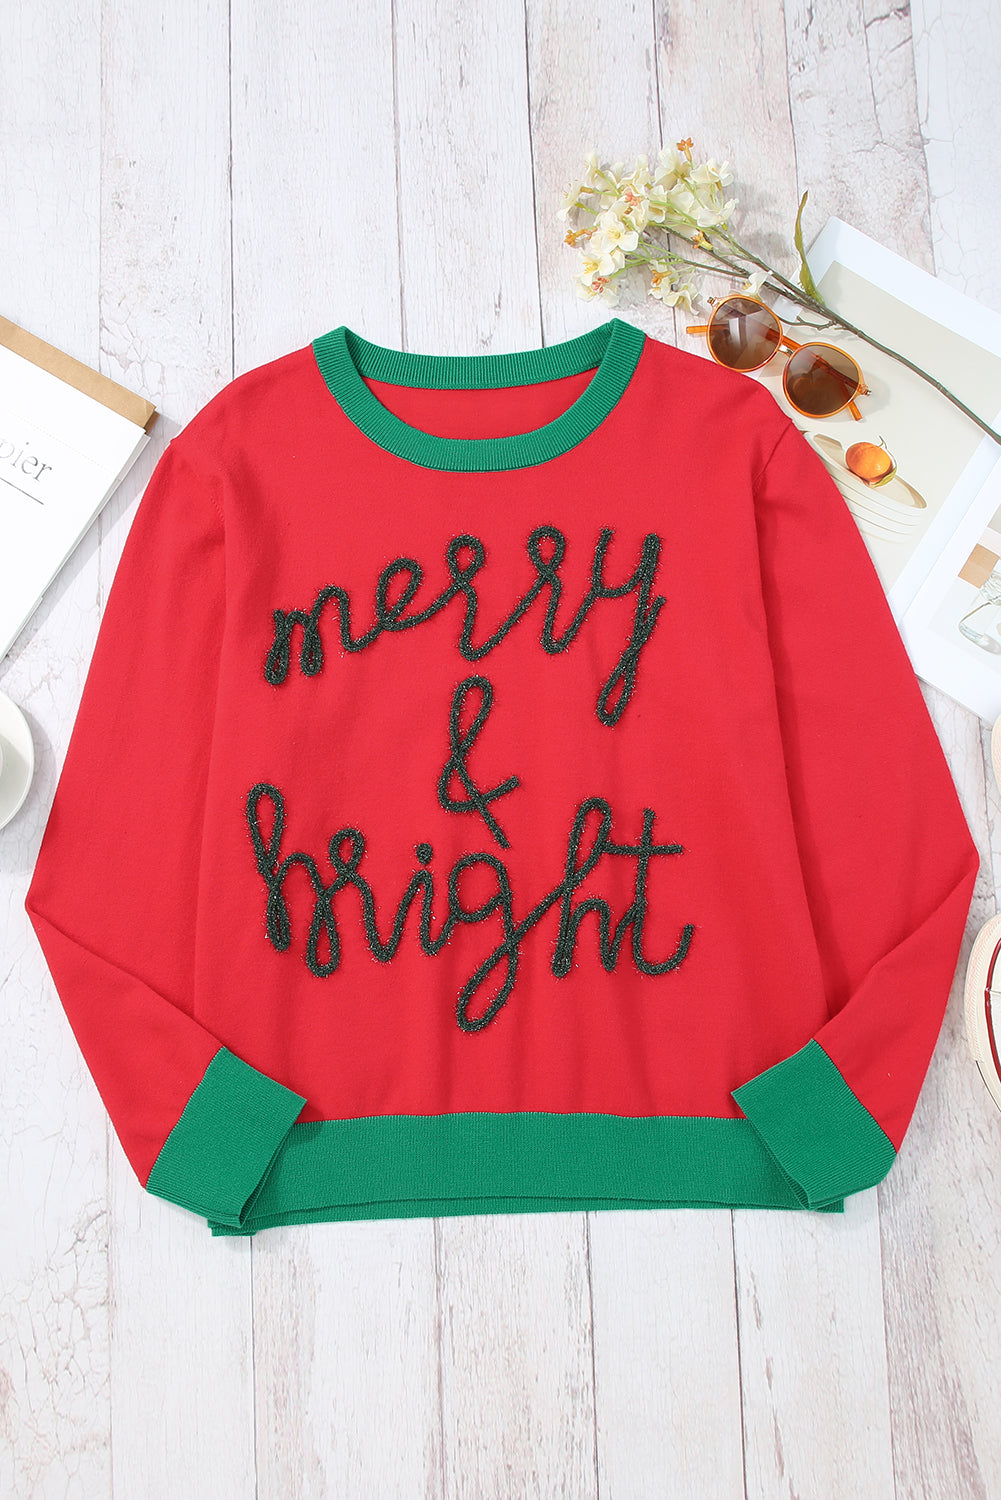 - Holly Jolly Round Neck, or Merry & Bright Christmas Sweater, or Other various Fall & Christmas Themed Sweaters - womens sweater at TFC&H Co.